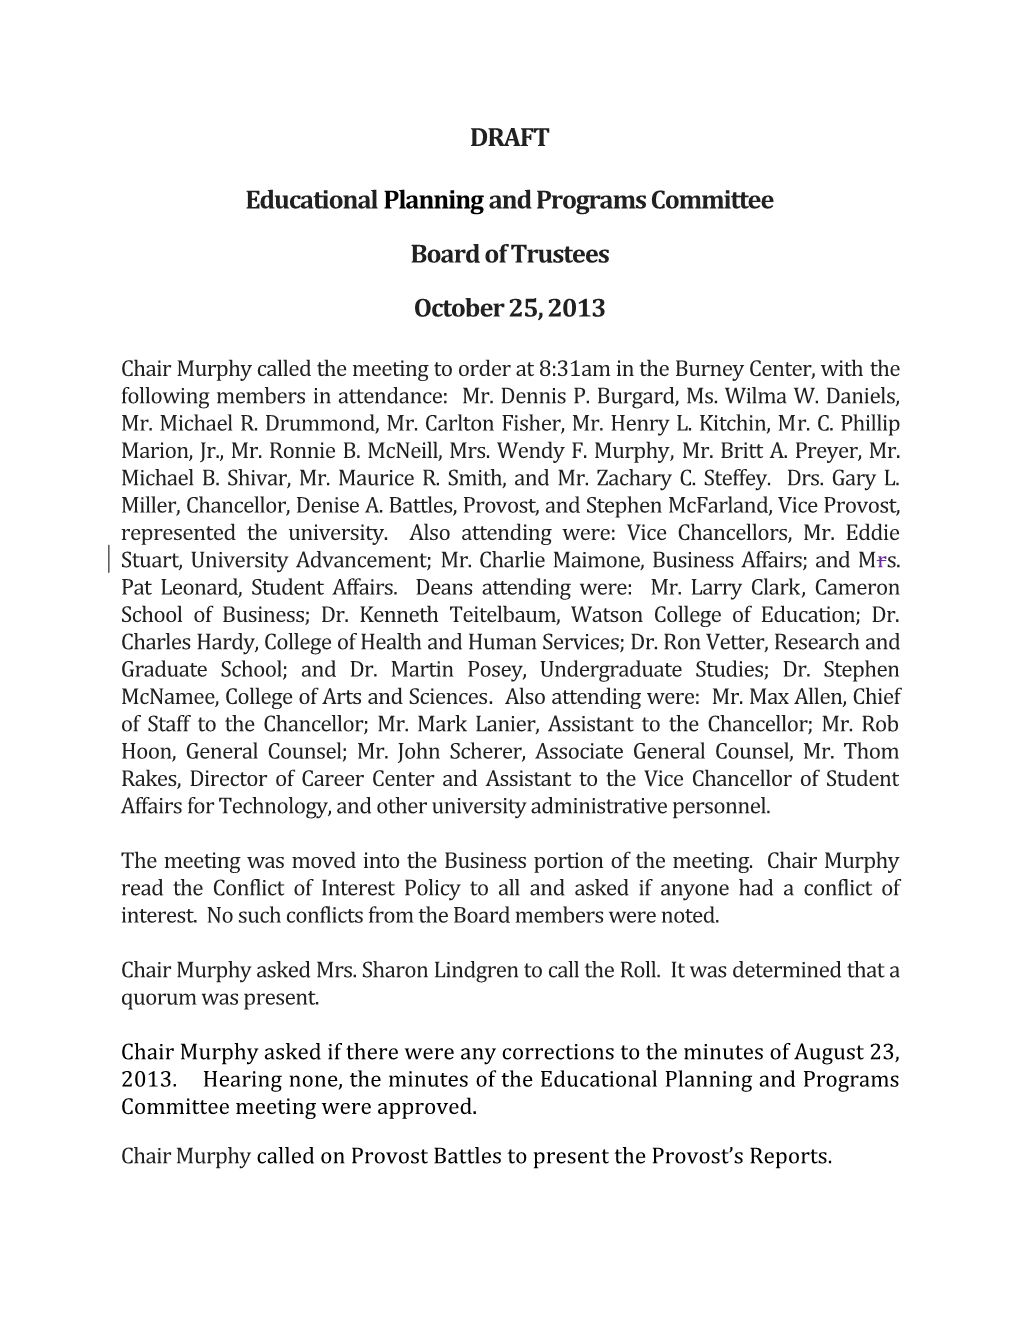 Educational Planning and Programs Committee